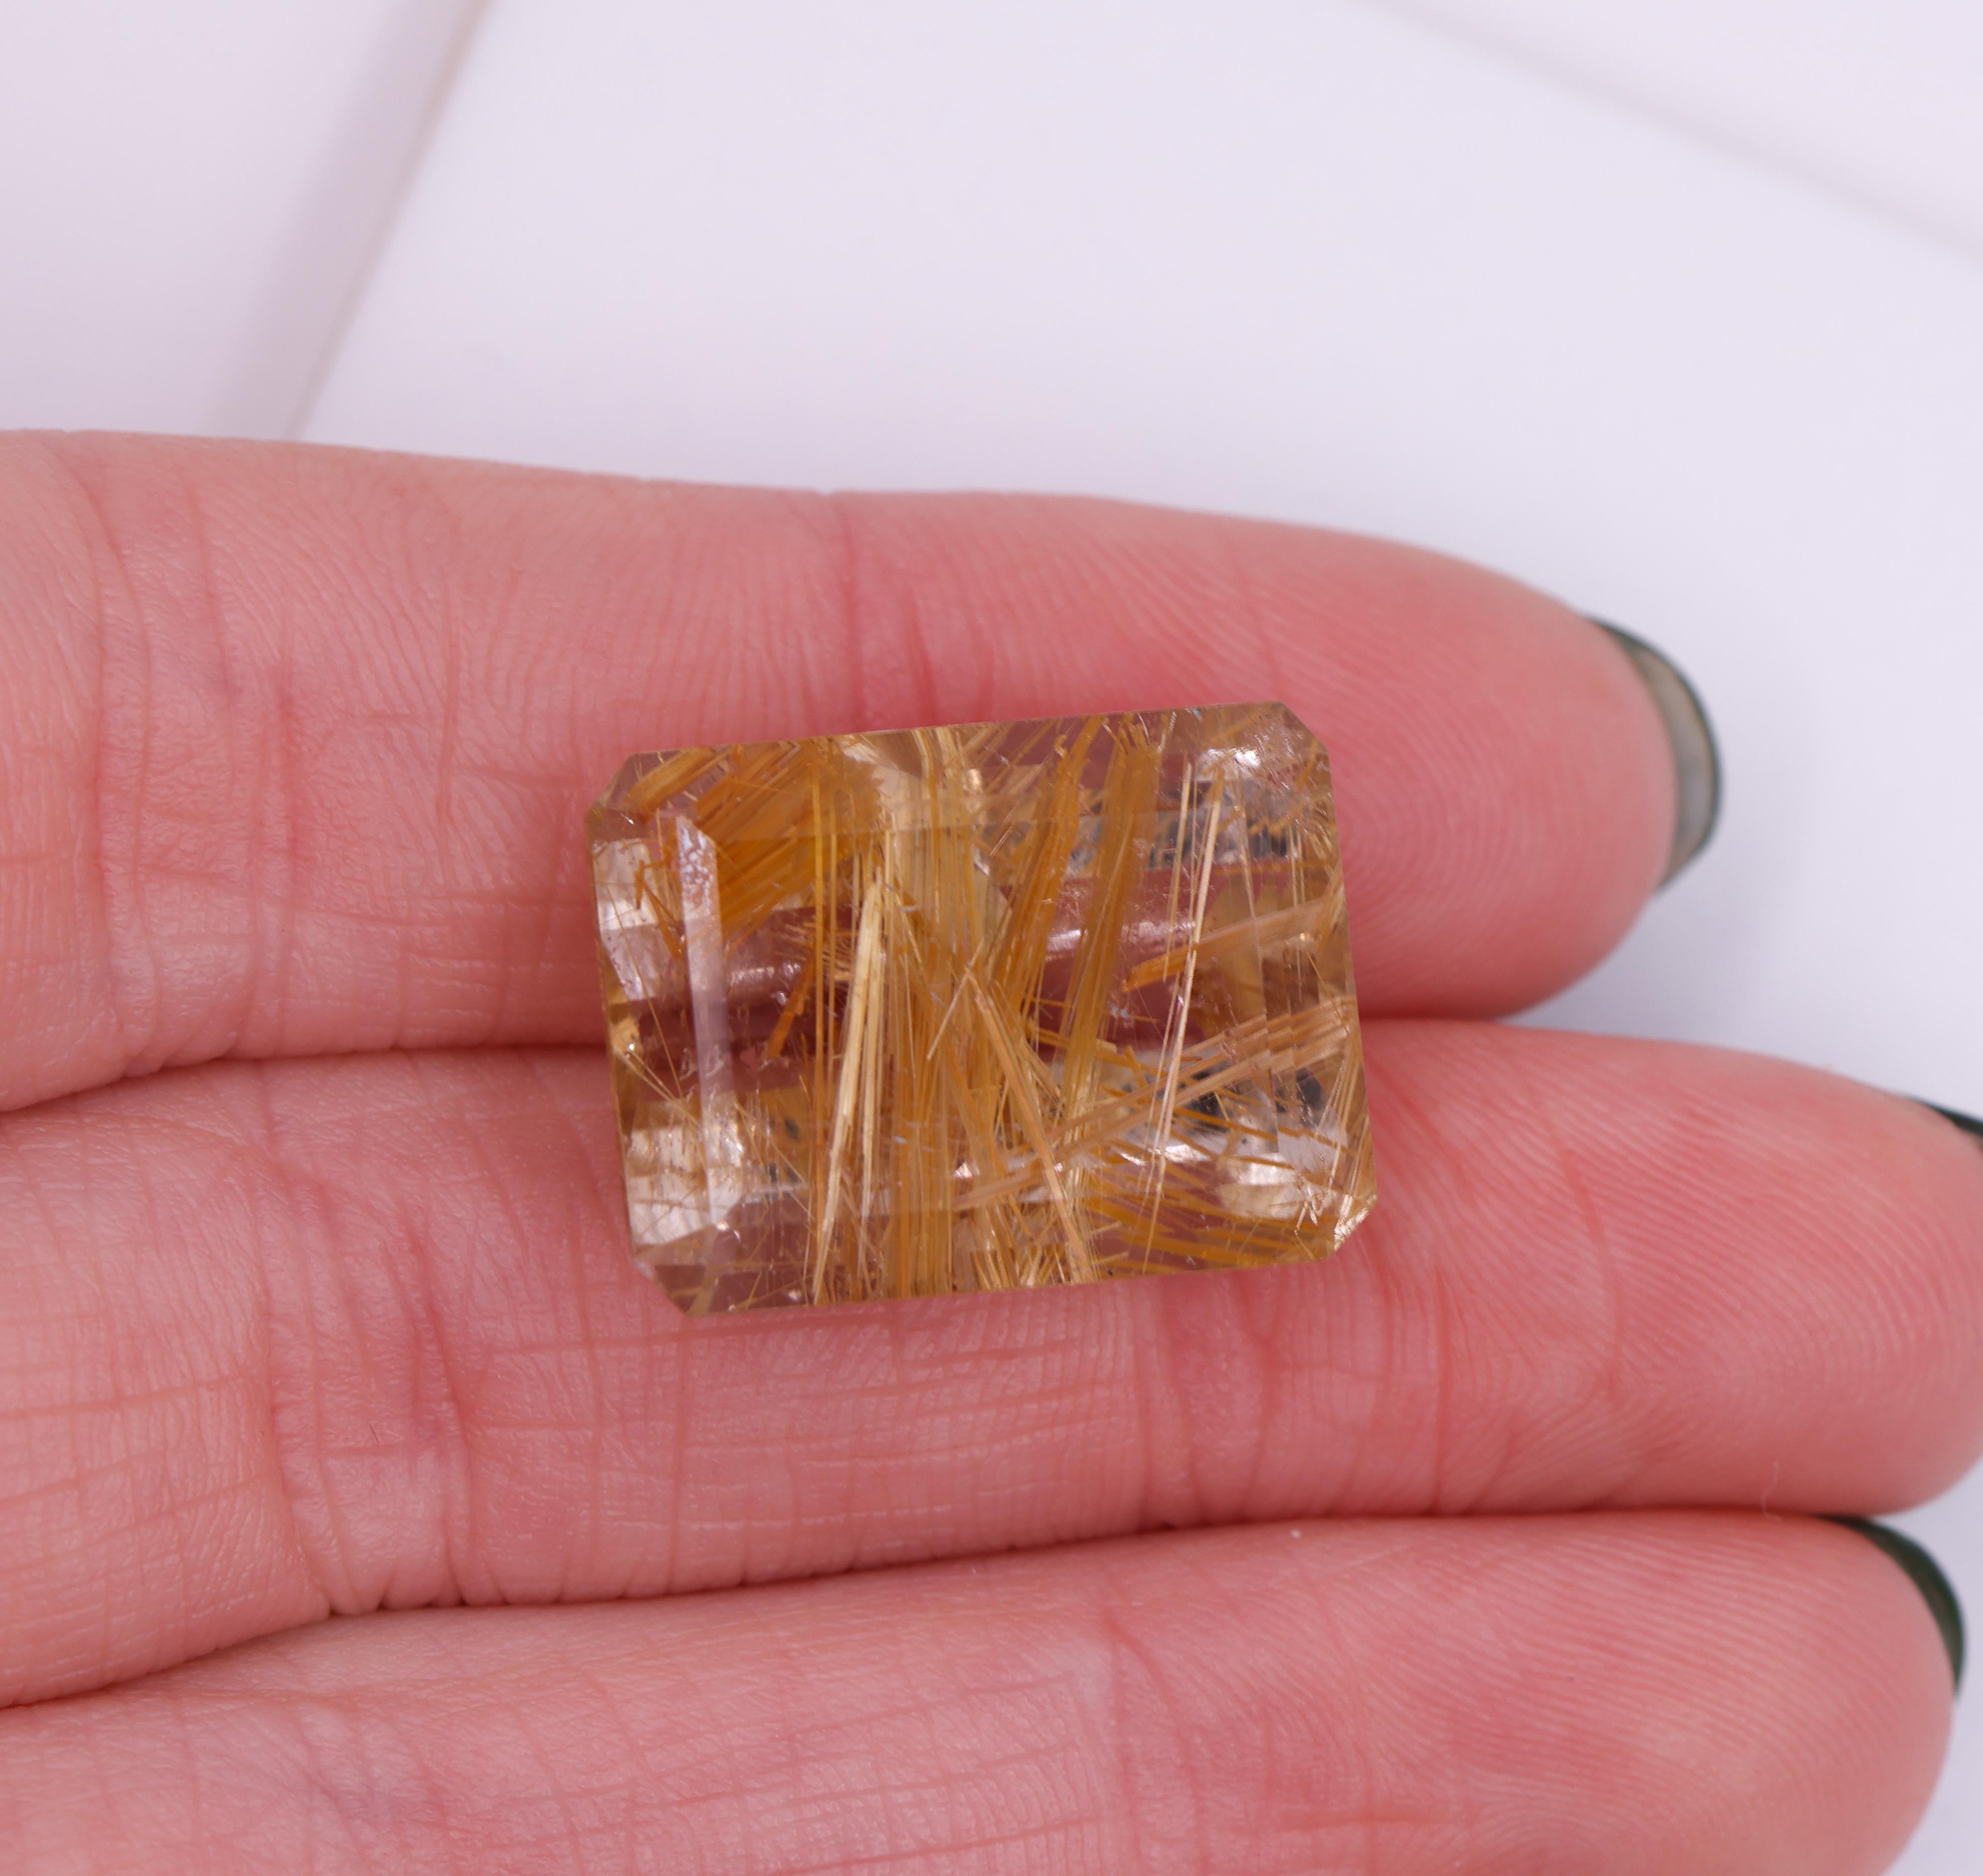 Presenting an elongated emerald cut 15.86 carat rutilated quartz loose gemstone! This gemstone exhibits a rectangular shape with precise facets that accenture it's clarity and brilliance. The rutile inclusions within the quartz create captivating